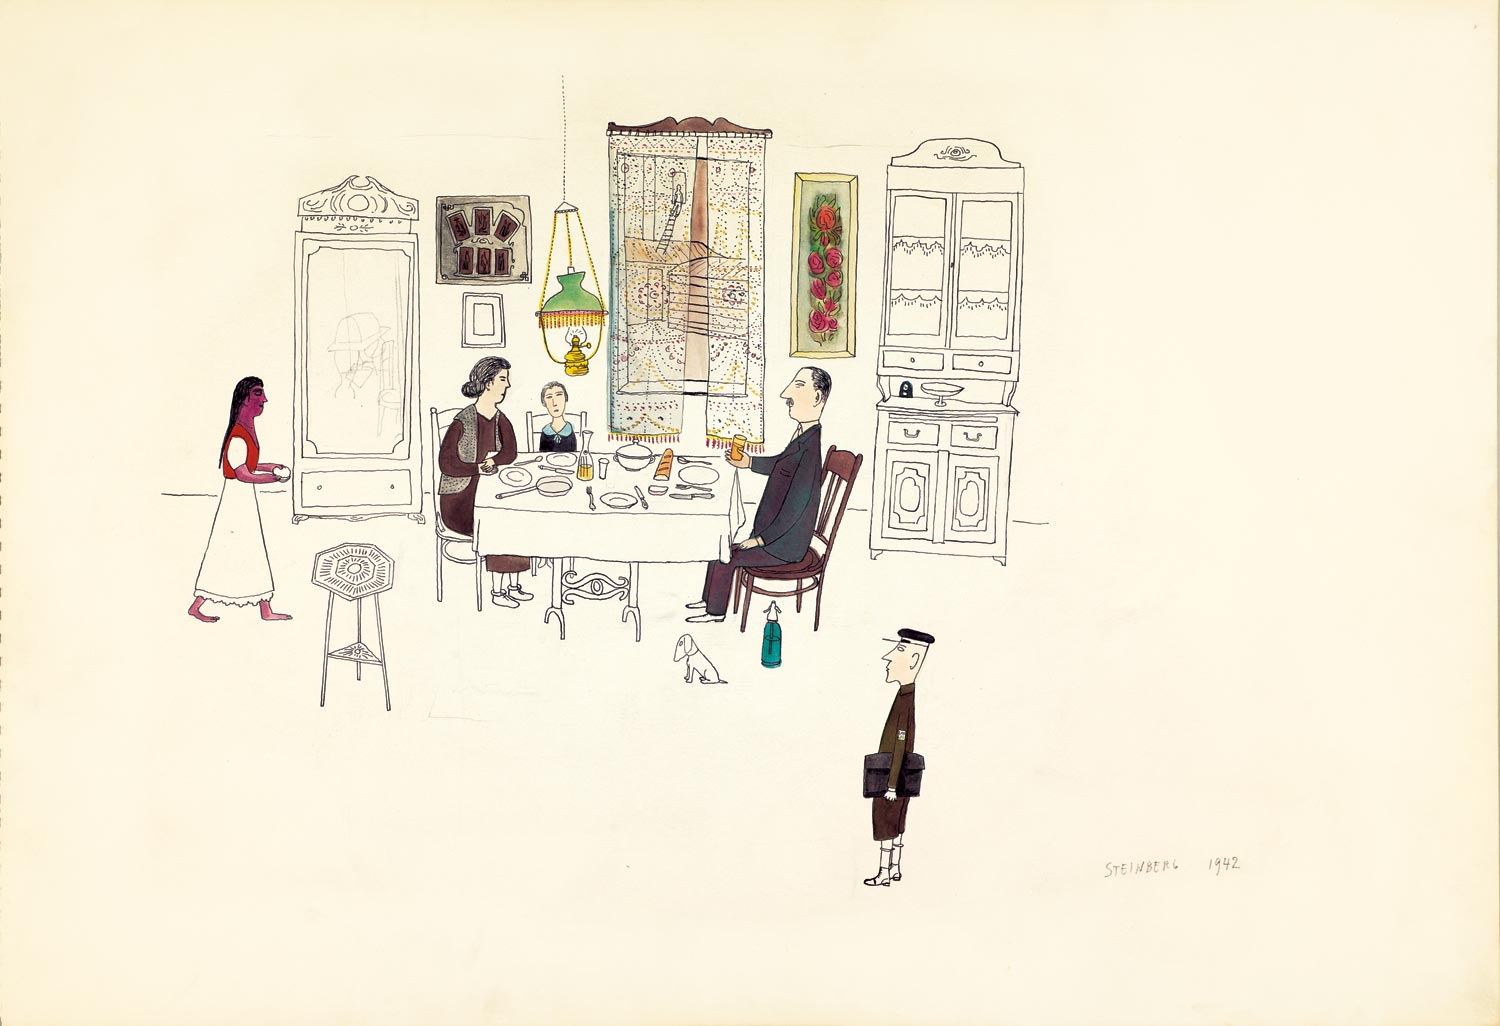 Strada Palas, 1942. Ink, pencil, and watercolor on paper, 14 7/8 x 21 ¾ in. The Saul Steinberg Foundation. One of the works in Steinberg’s 1943 show at the Wakefield Gallery.